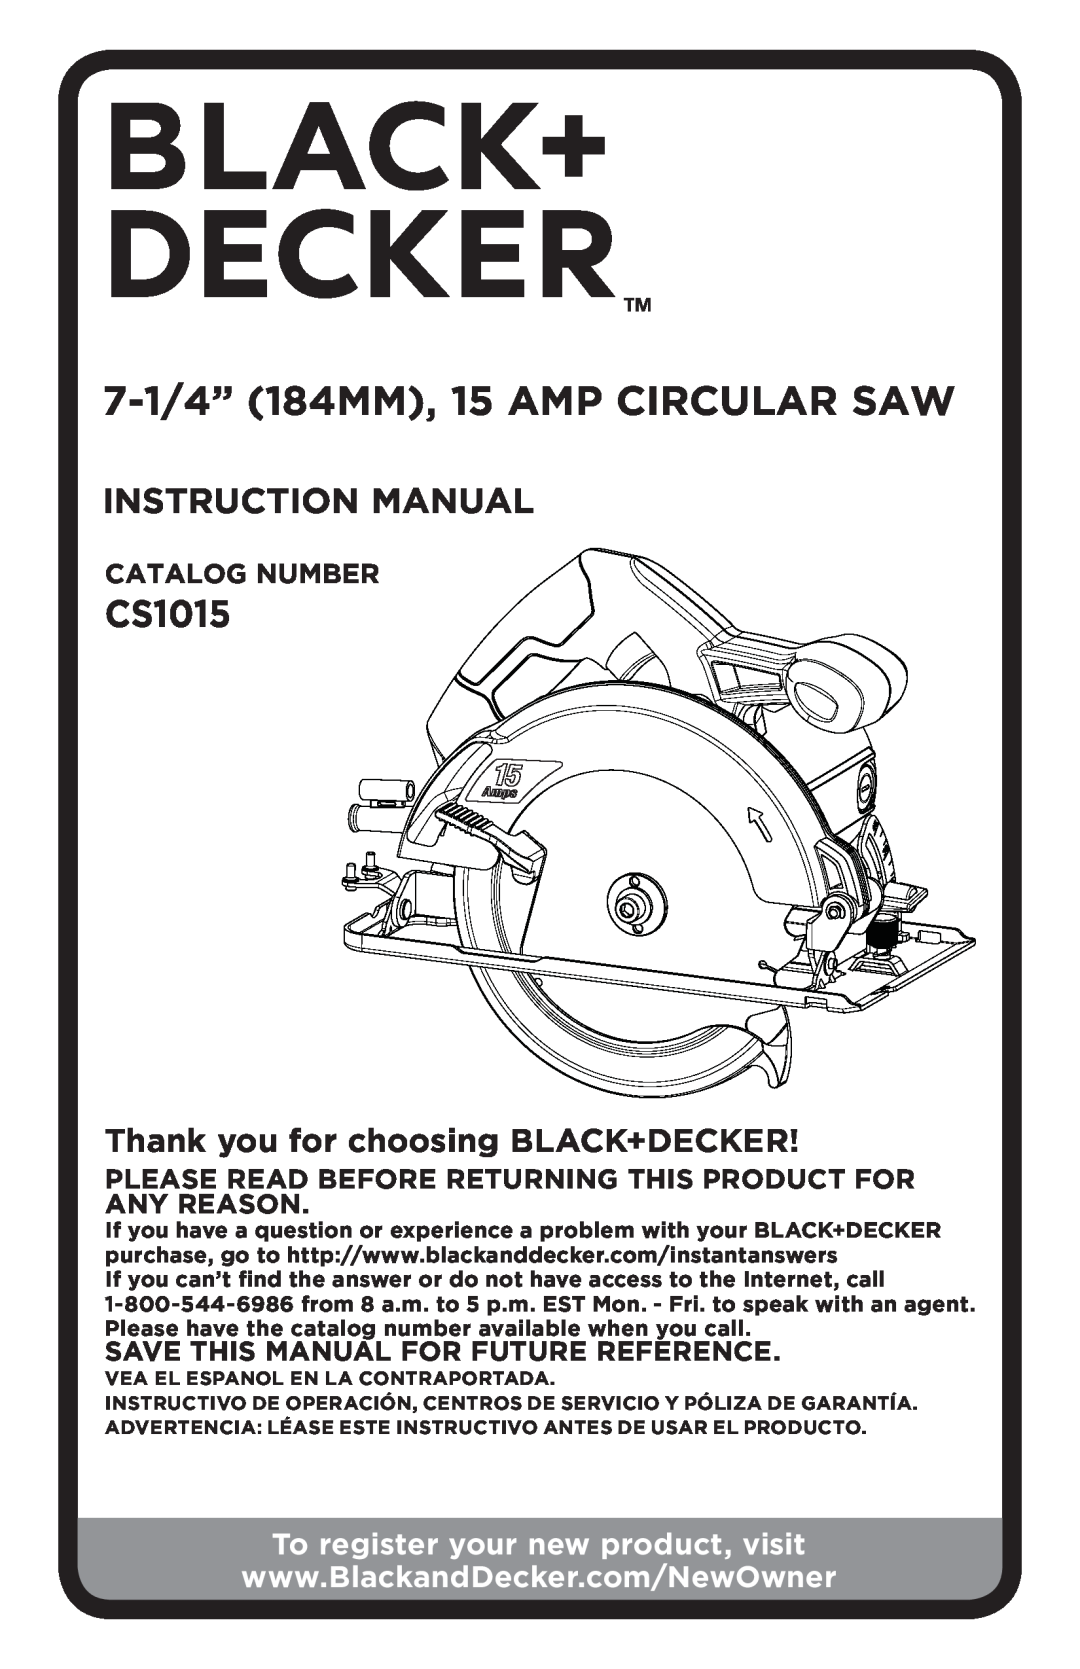 Black & Decker CS1015 instruction manual Thank you for choosing Black+Decker, To register your new product, visit 